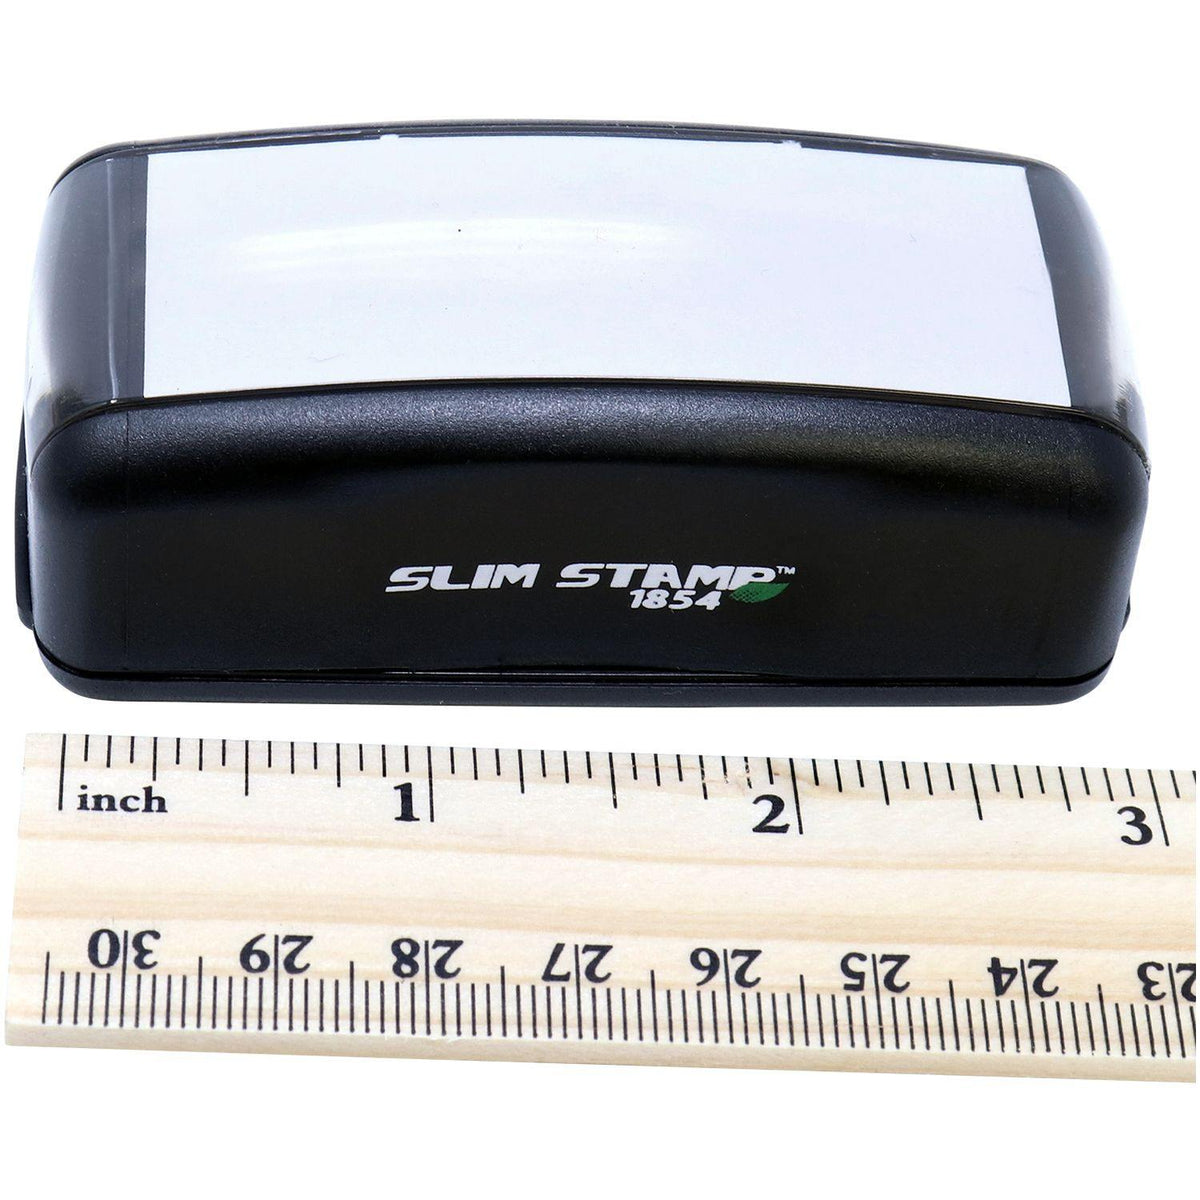 Measurement Large Pre-Inked Please Pay Now No Statements Stamp with Ruler